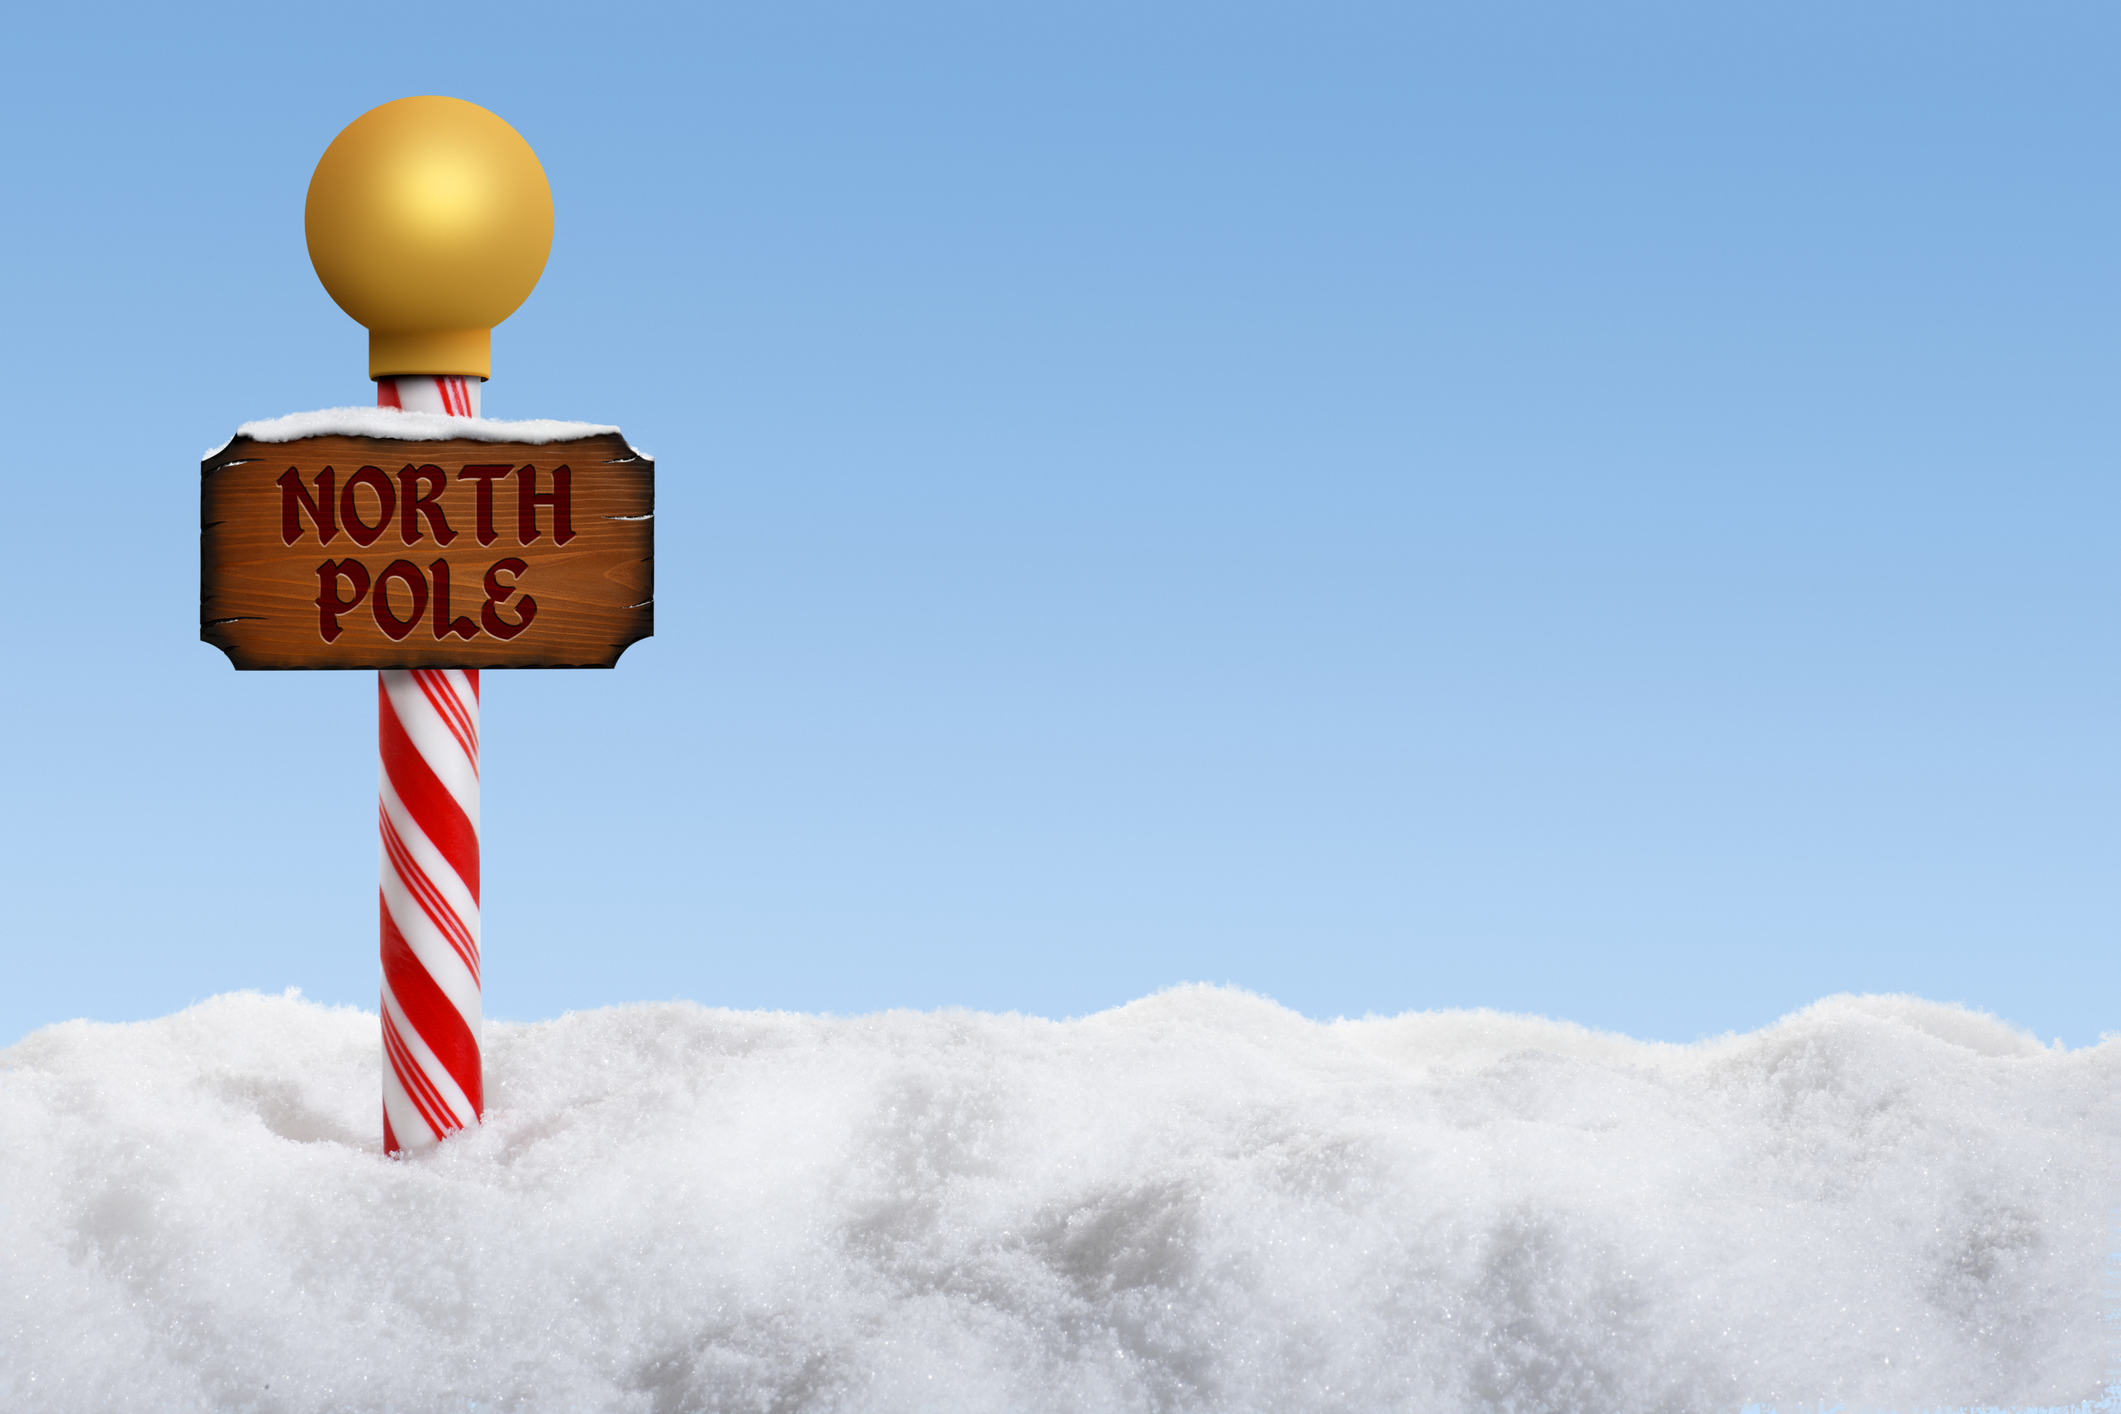 Inflation Has Reached the North Pole as a Santa Shortage Looms